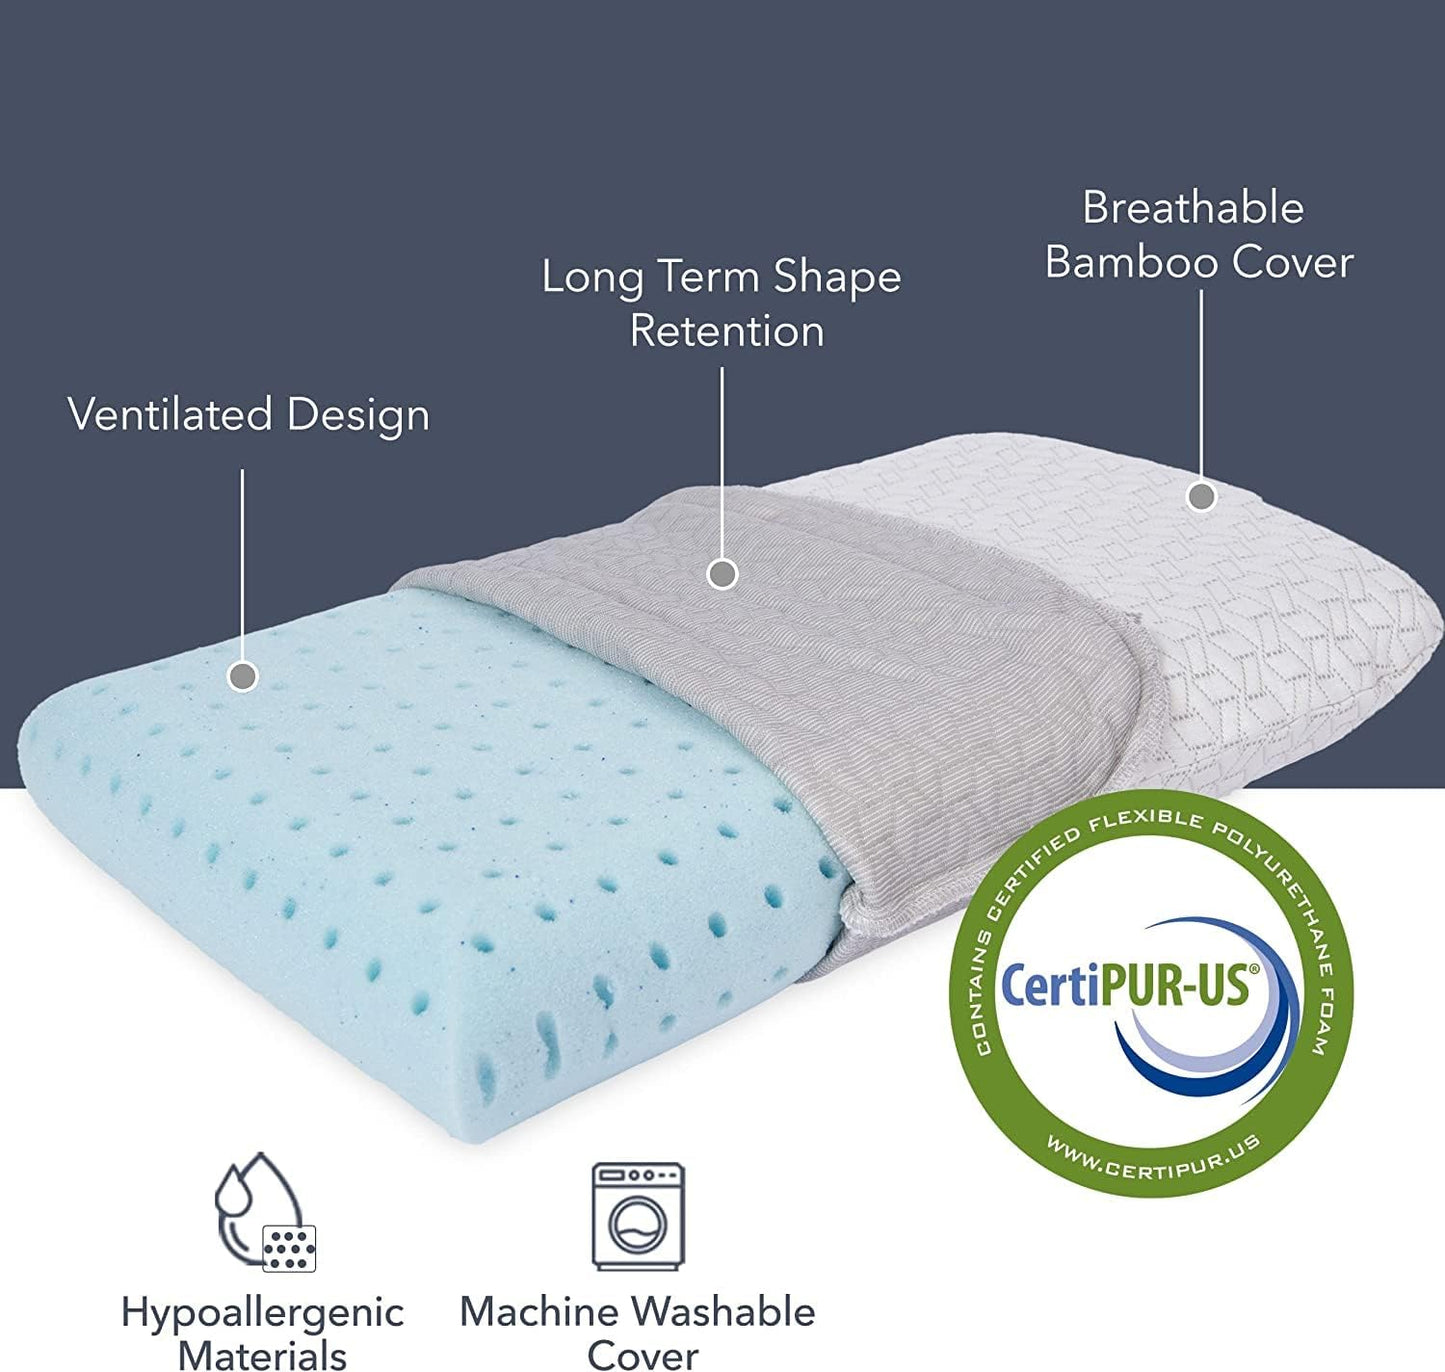 New Gel Memory Foam Pillow -Standard Size - Ventilated, Premium Bed Pillows with Washable and Bamboo Pillow Cover, Cooling, Orthopedic Sleeping, Side and Back Sleepers - Dorm Room Essentials